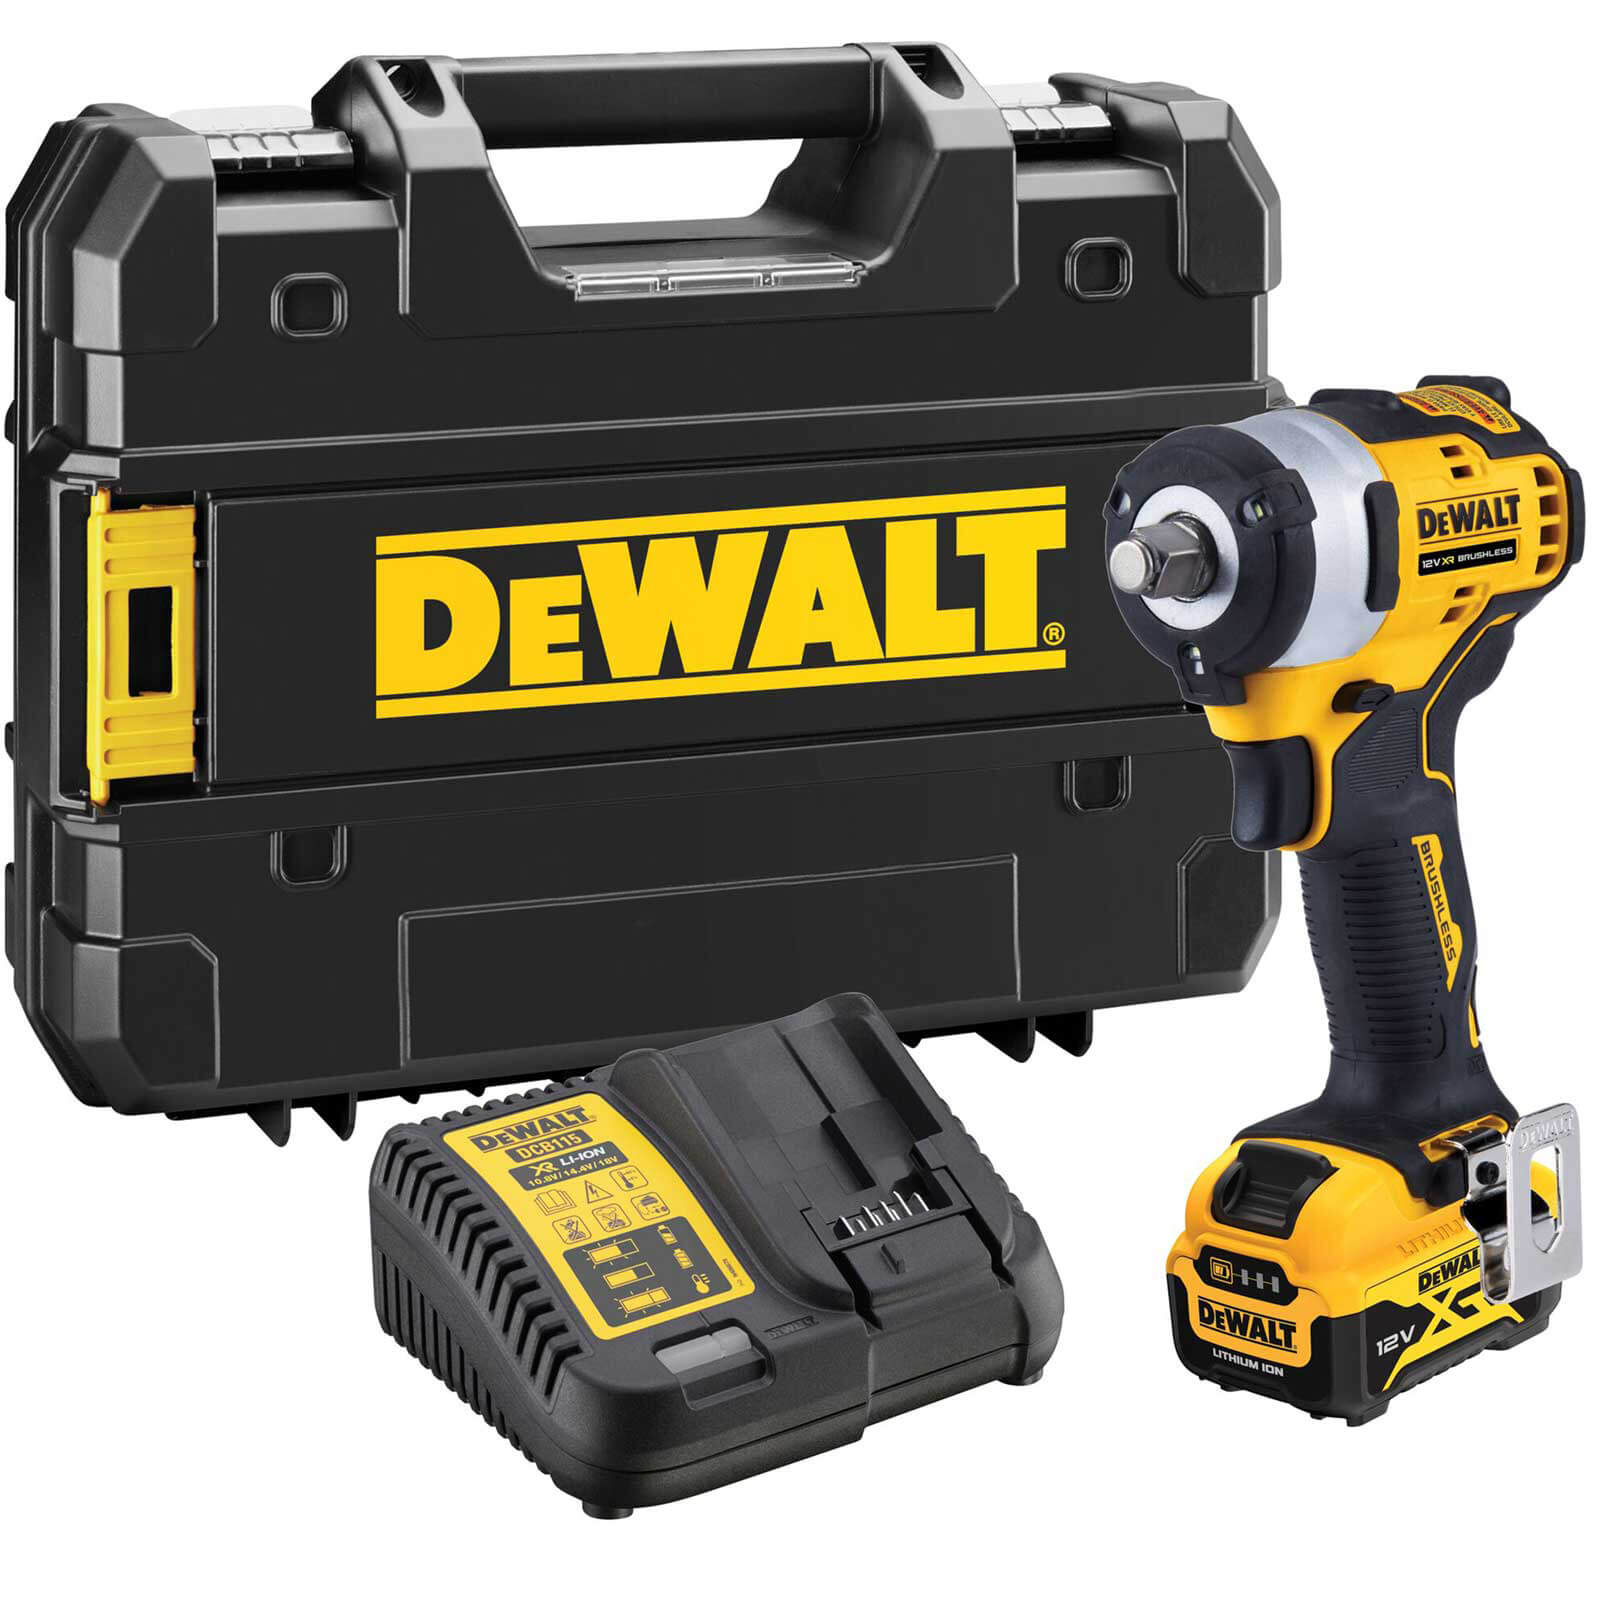 Image of DeWalt DCF901 12v XR Cordless Brushless Compact 1/2" Drive Impact Wrench 1 x 5ah Li-ion Charger Case